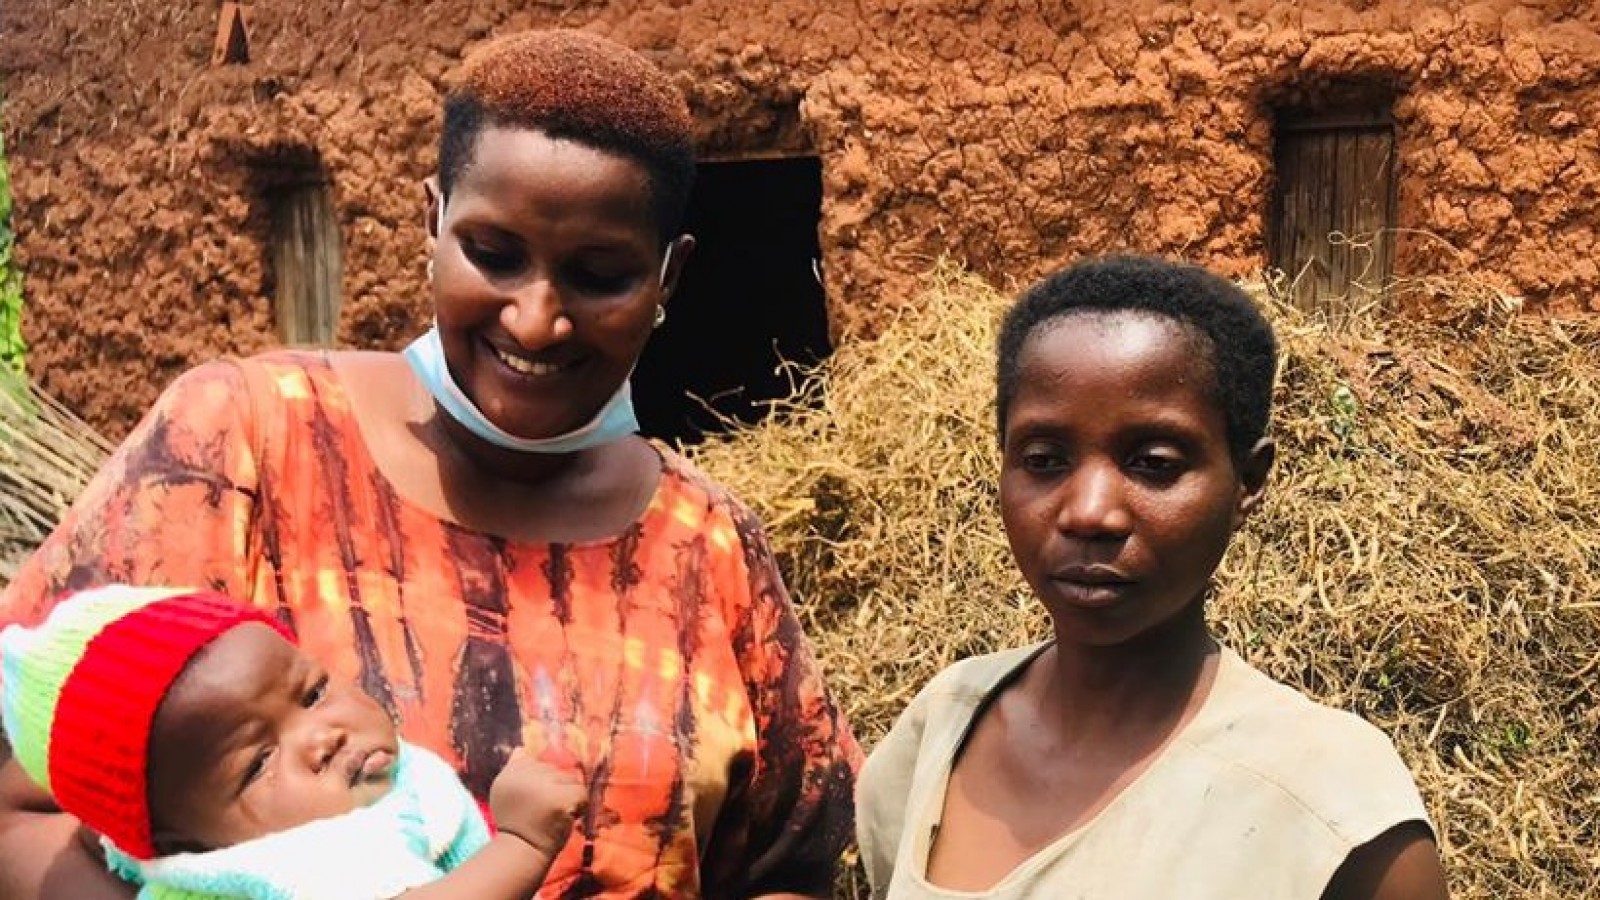 Two Rwandan women, one holding a baby and smiling.